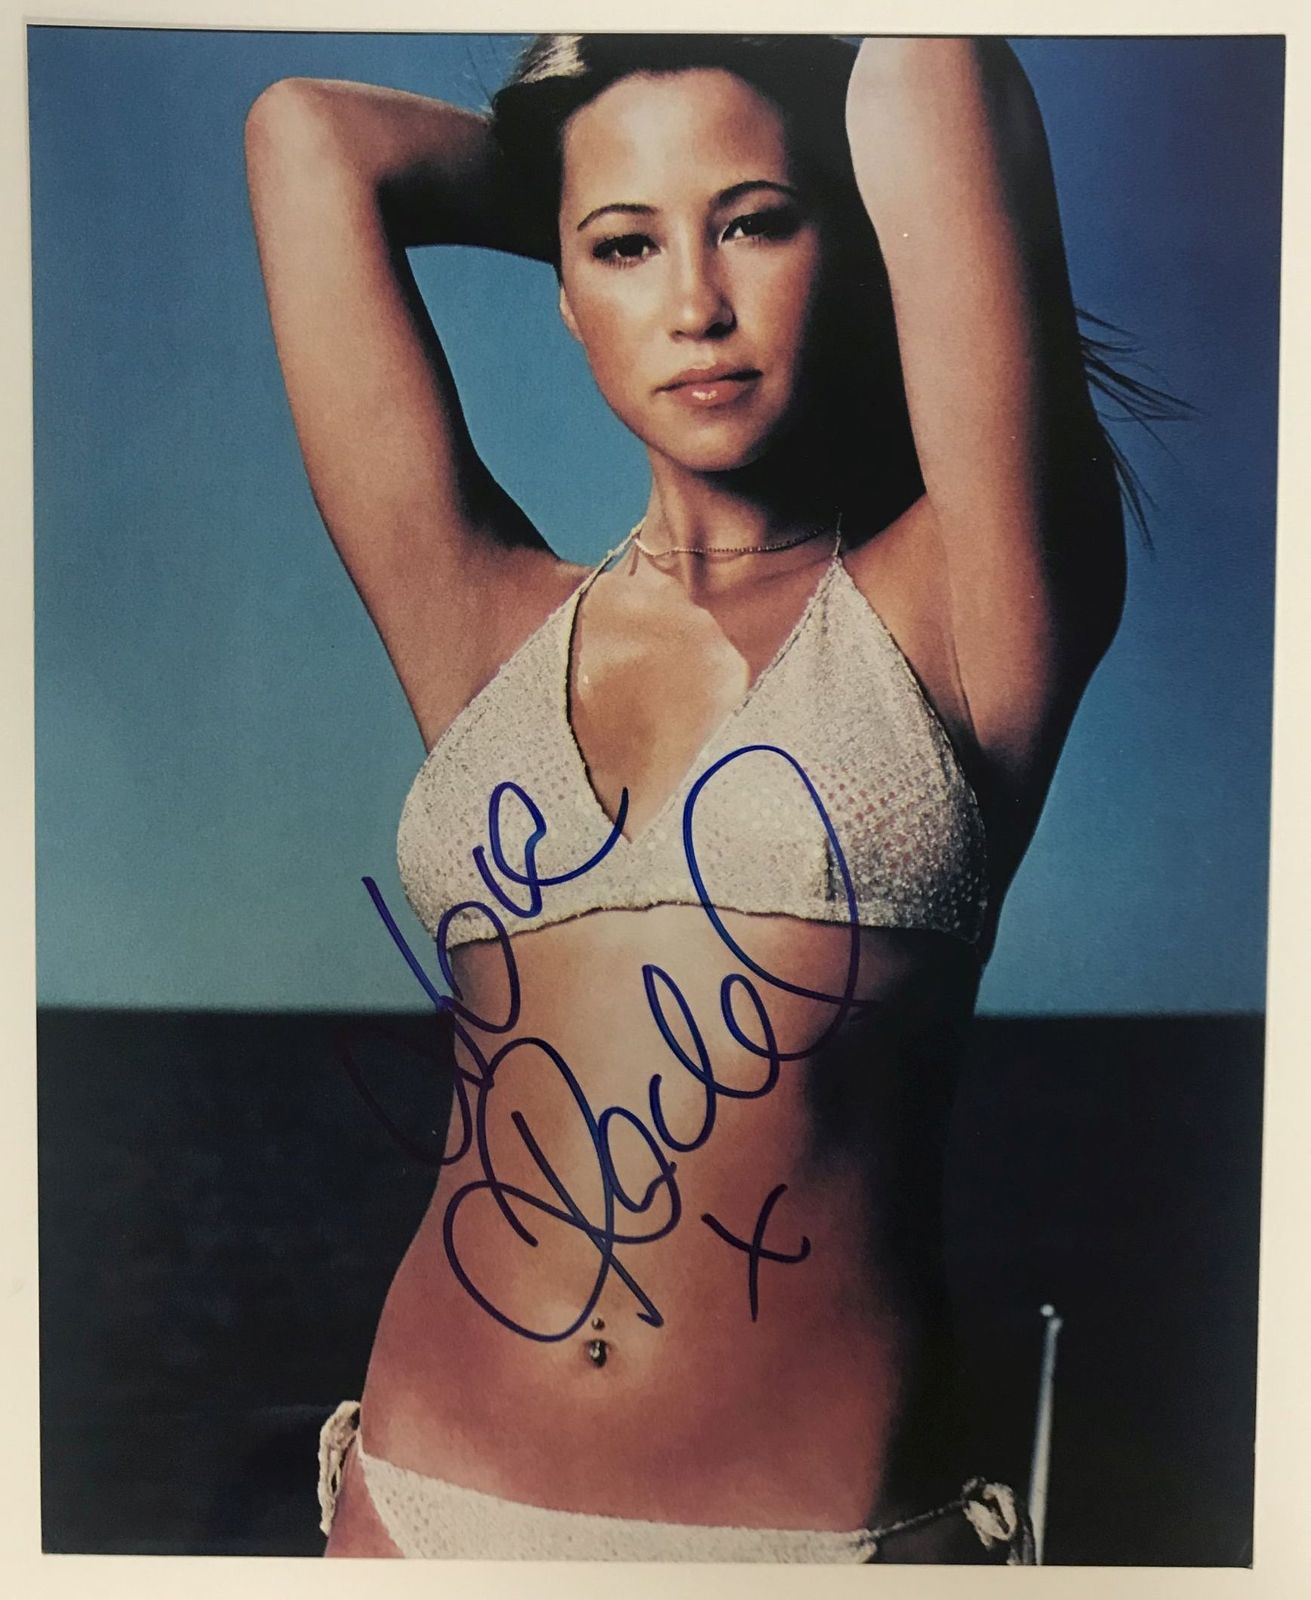 Primary image for Rachel Stevens Signed Autographed Glossy 8x10 Photo - HOLO COA